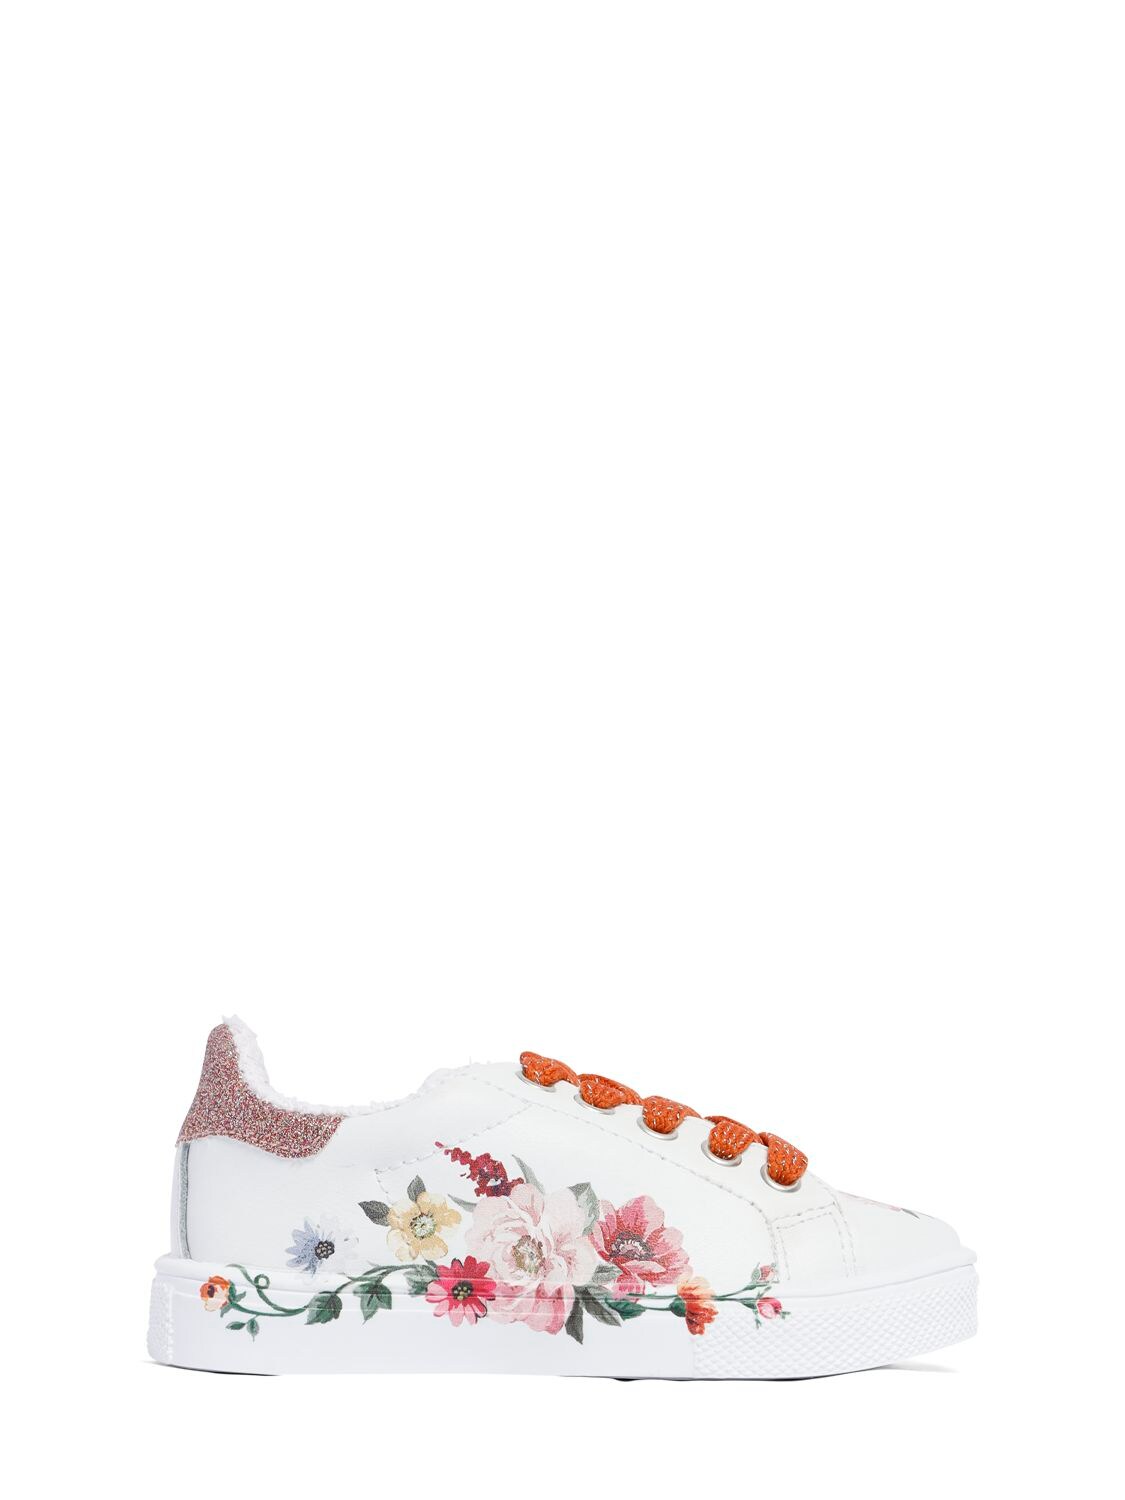 MONNALISA ROSE PRINT LEATHER LACE-UP SNEAKERS